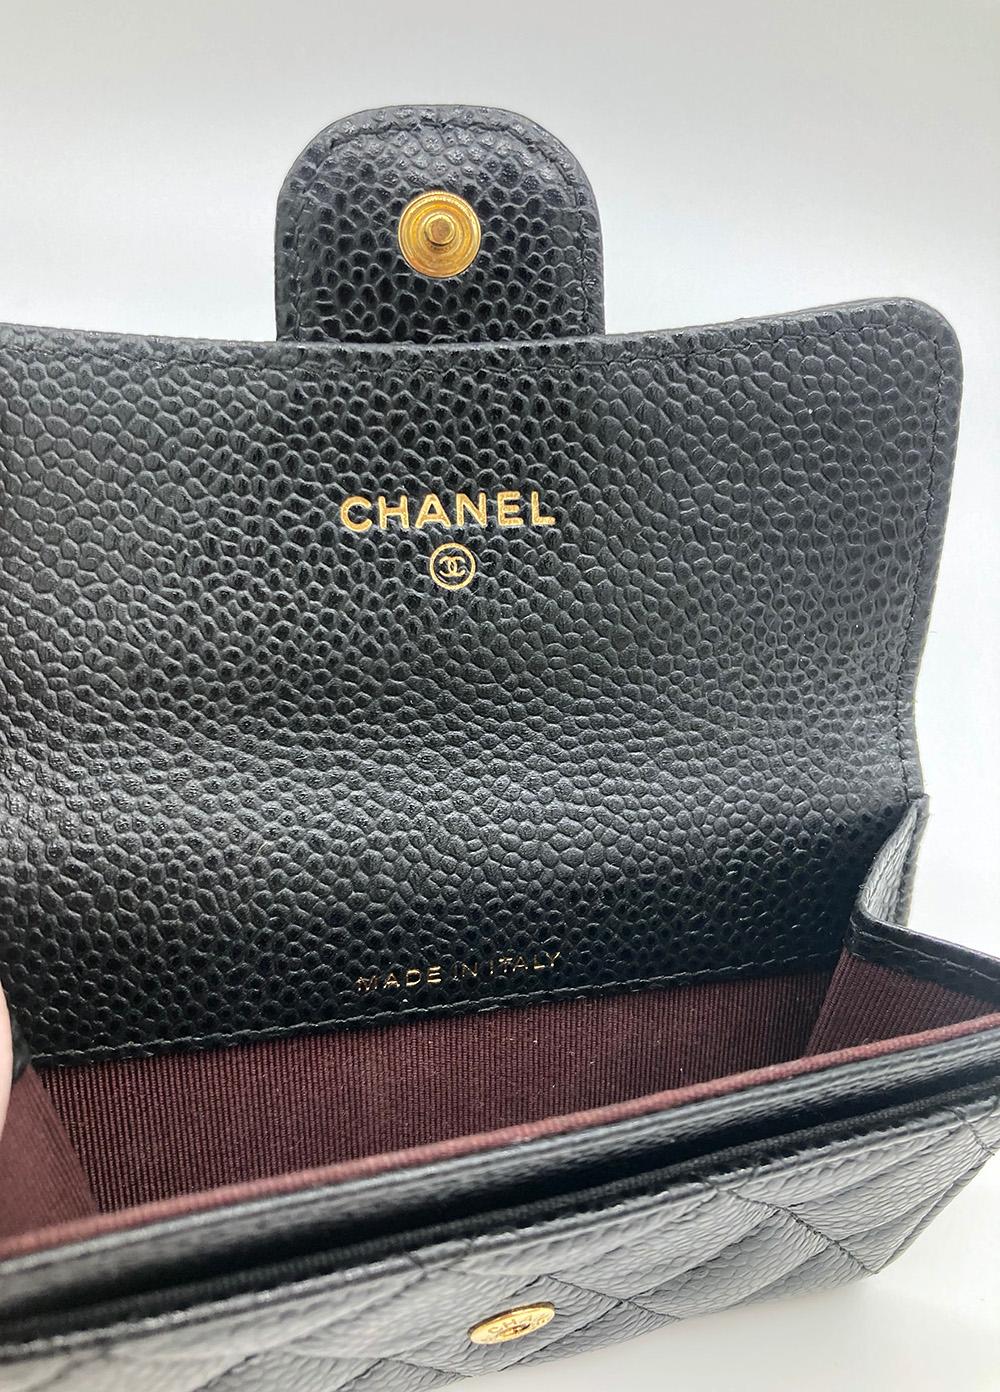 Chanel Black Caviar Quilted Snap Wallet 2